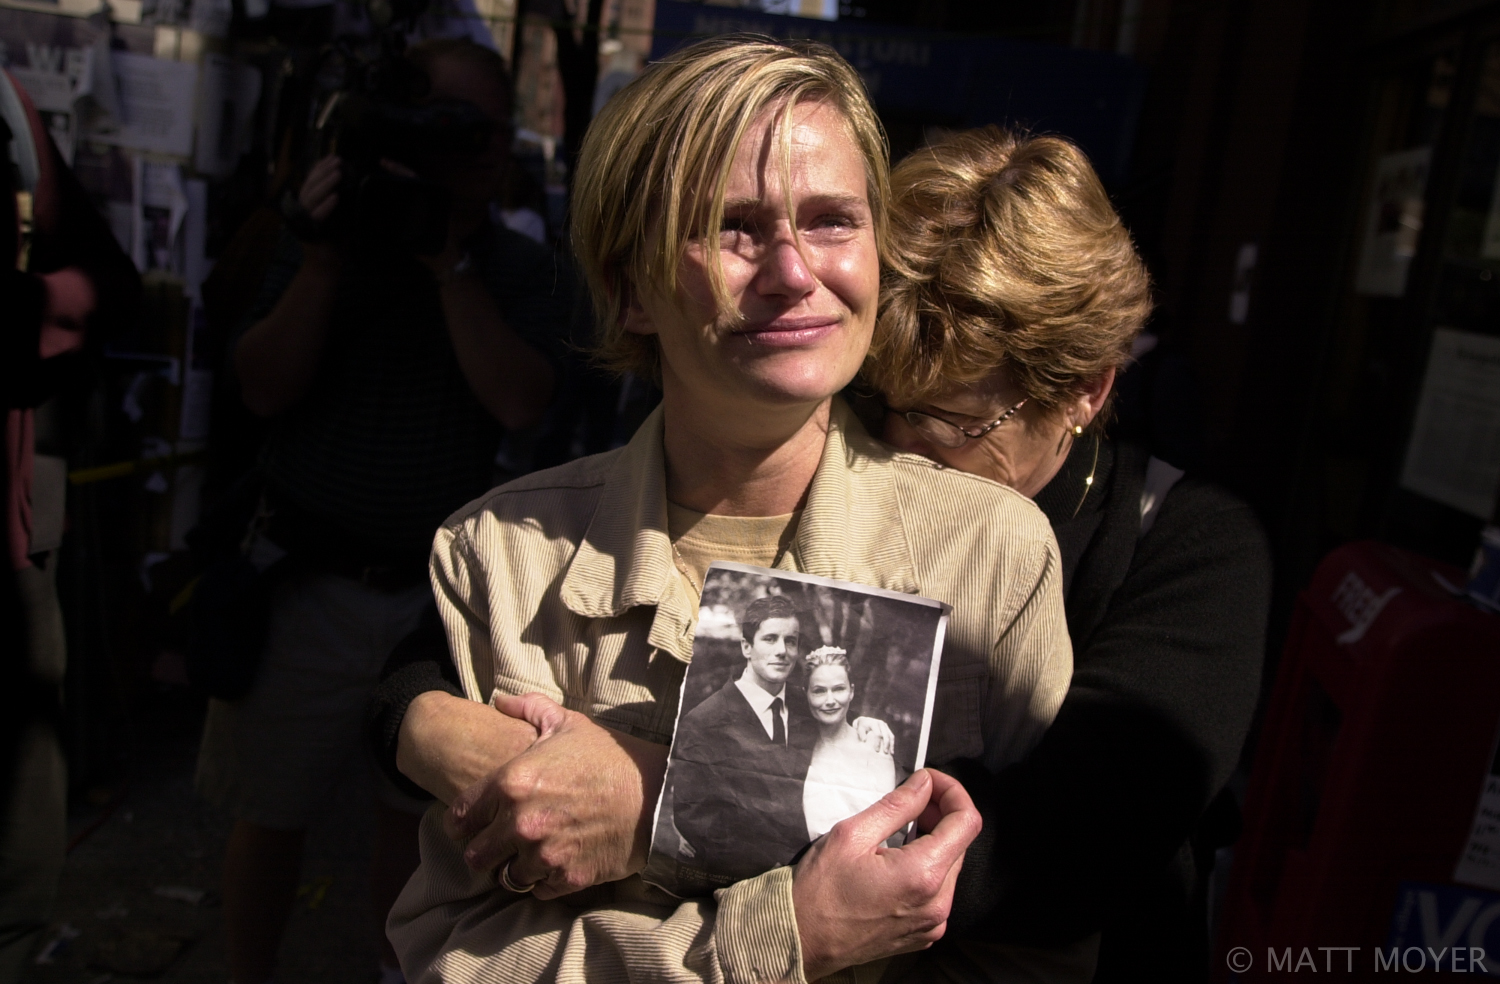  Mary Ortale, left, of Brooklyn, N.Y., holds a picture of herself with her missing husband, Peter while she is hugged by her mother, Kathi Adlum at the 69th Regiment Armory in New York Saturday, Sept. 15, 2001. Ortale's husband has been missing since